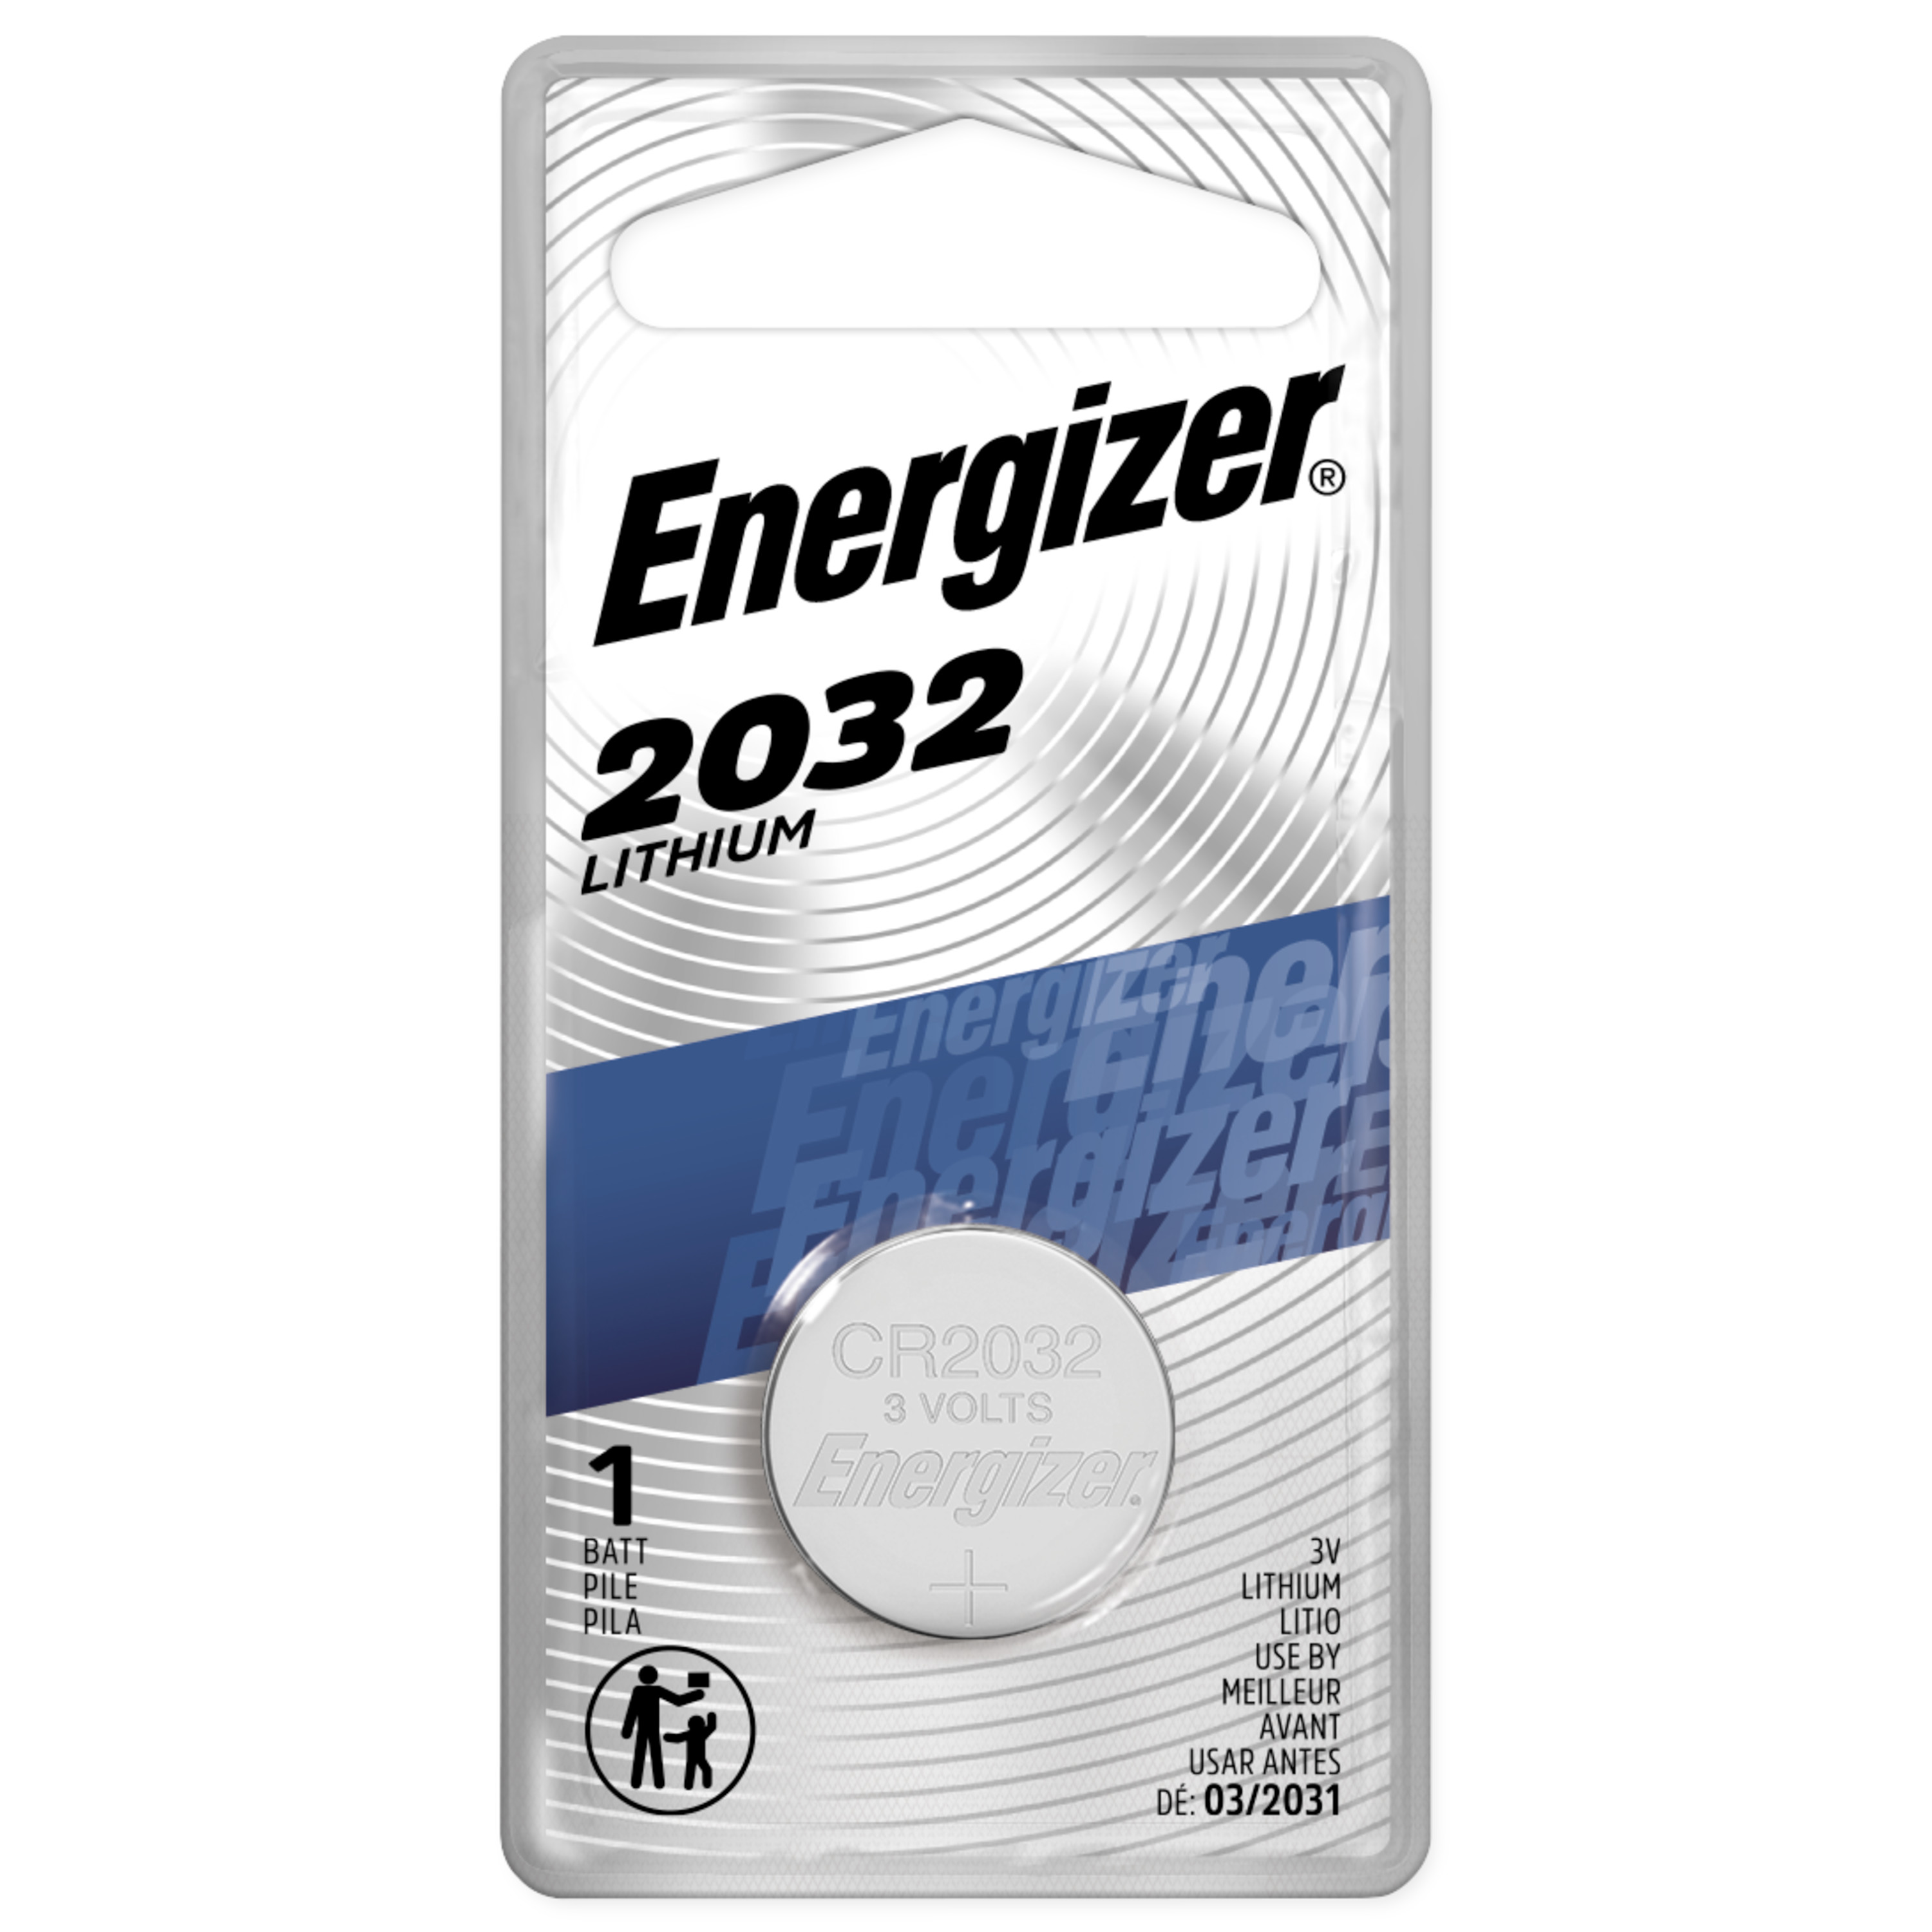 Energizer 2032 Batteries (1 Pack), 3V Lithium Coin Batteries - image 1 of 13